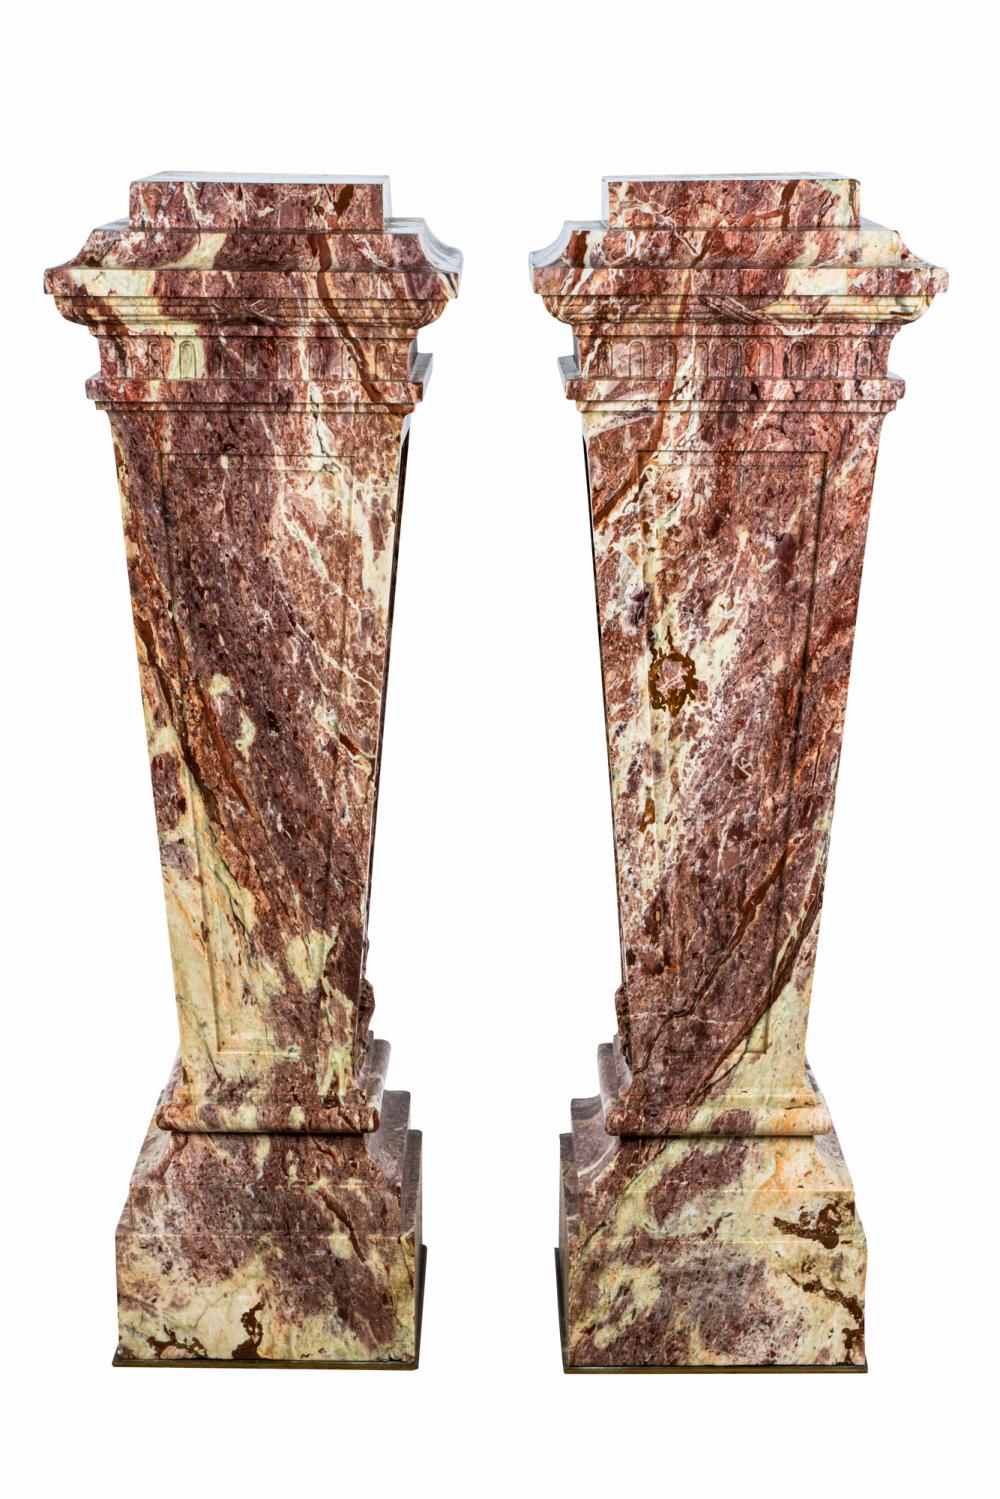 PAIR OF BRECHE VIOLETTE MARBLE